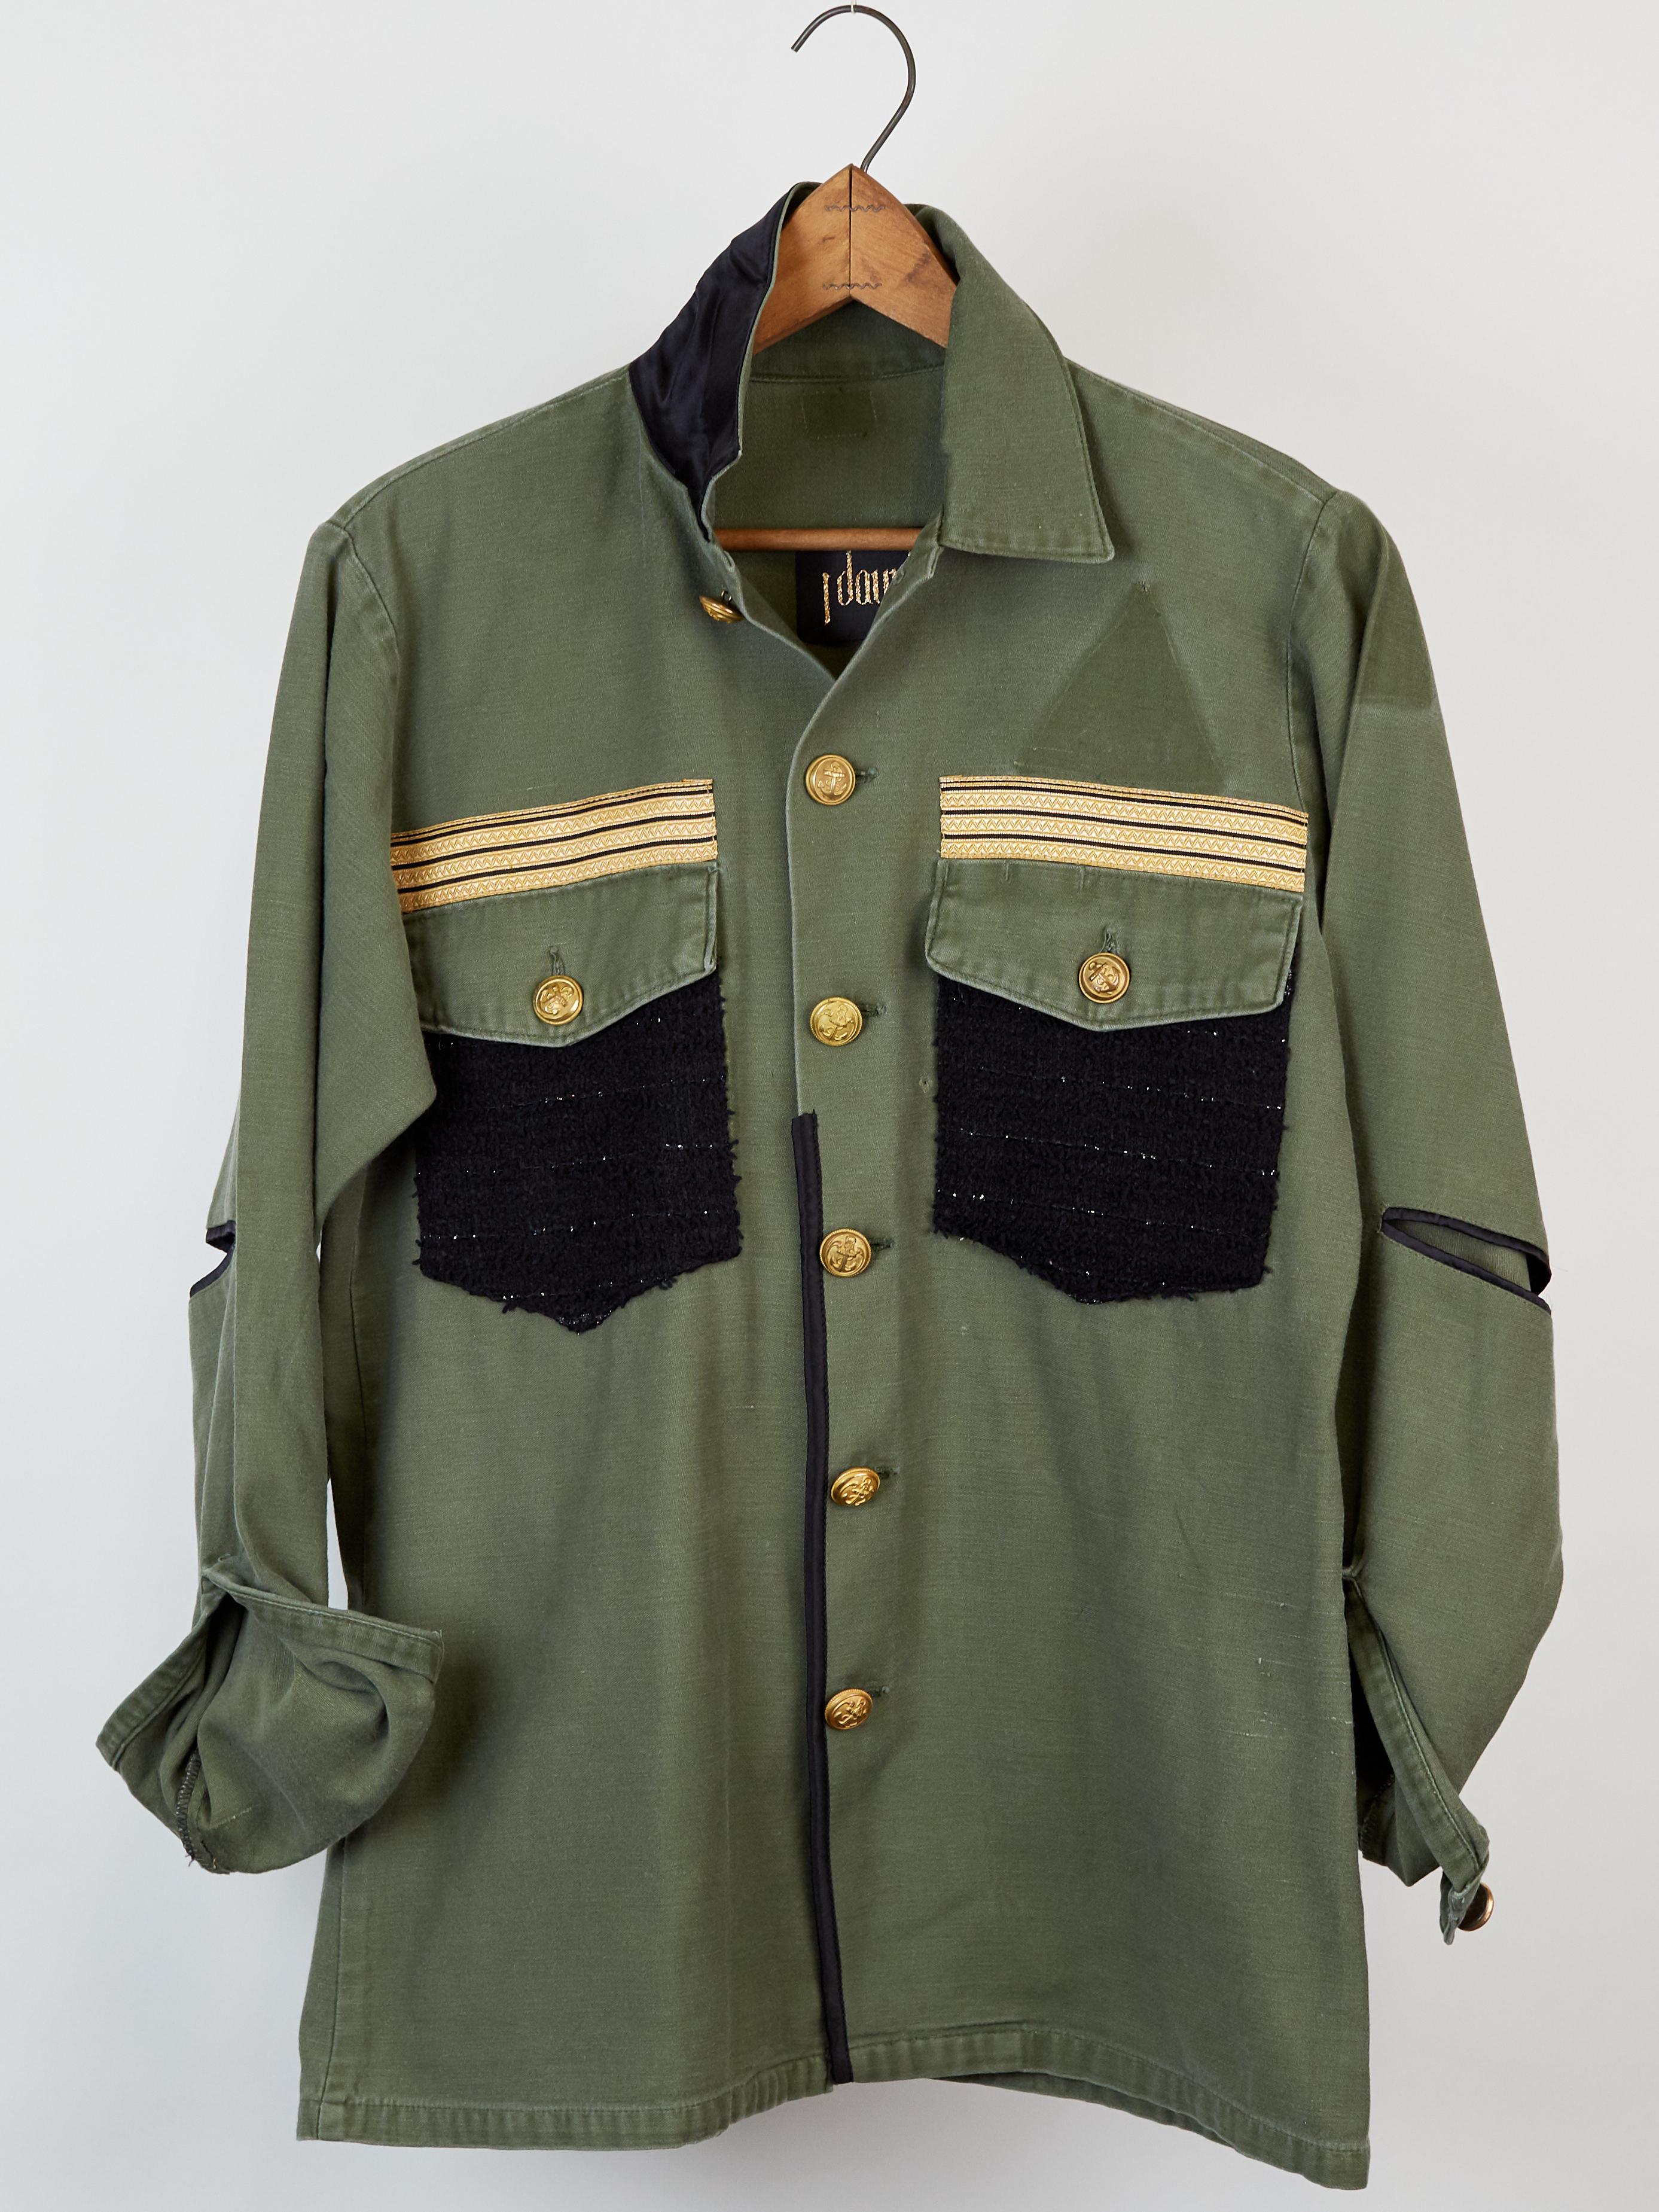 Women's Military Green Jacket Tweed Gold Buttons Gold Braid One of a kind J Dauphin